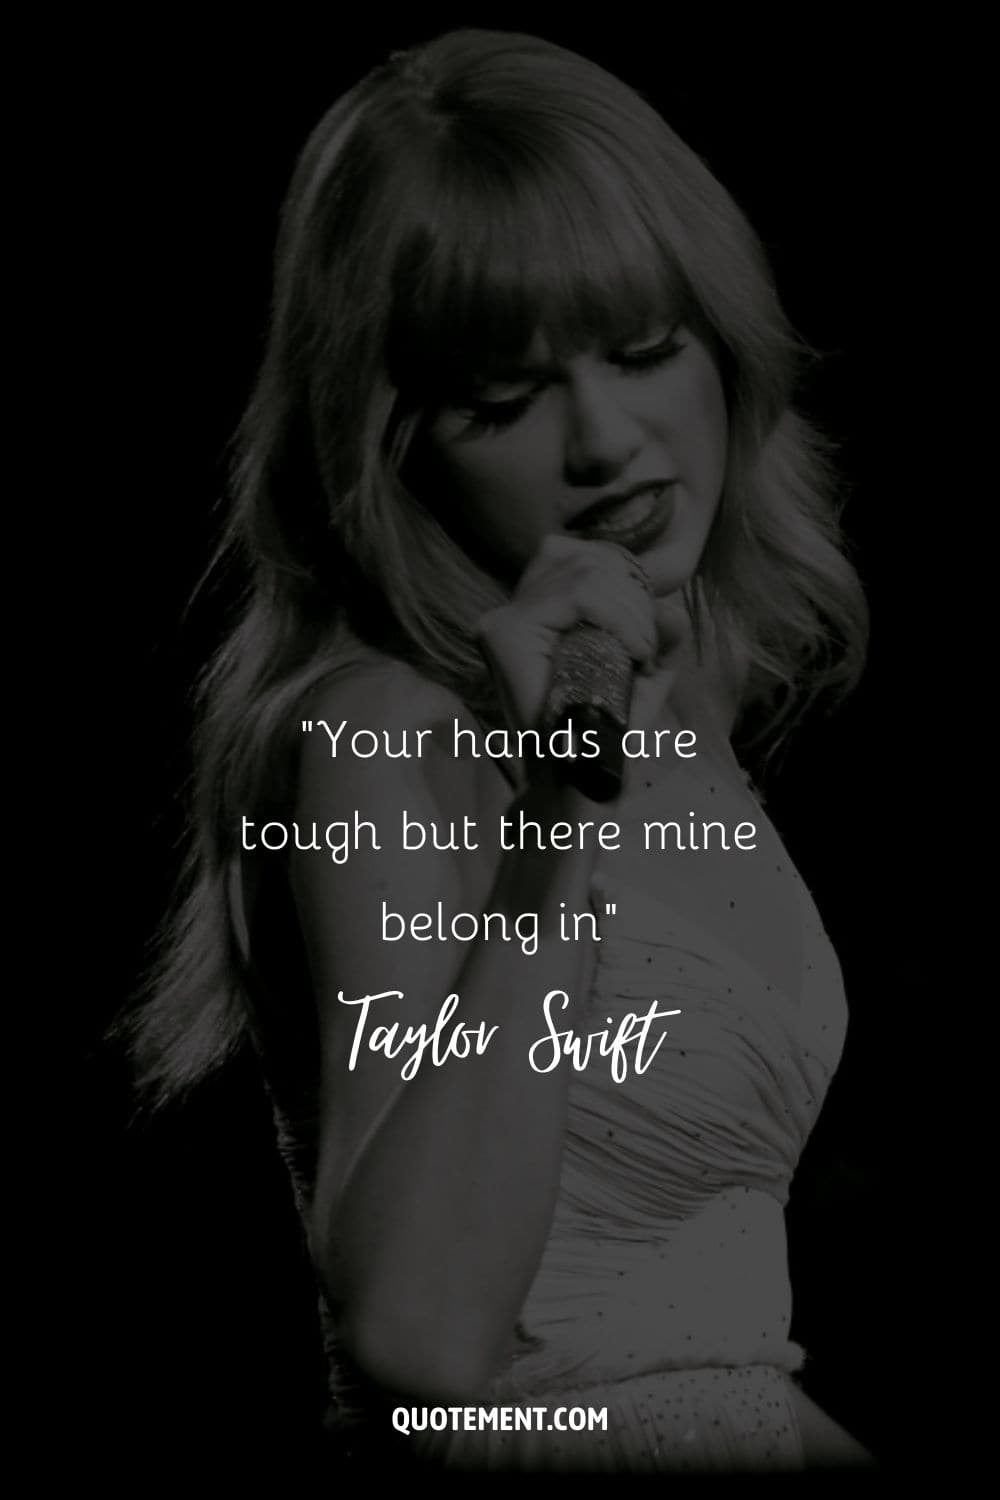 “Your hands are tough but there mine belong in” ― Taylor Swift